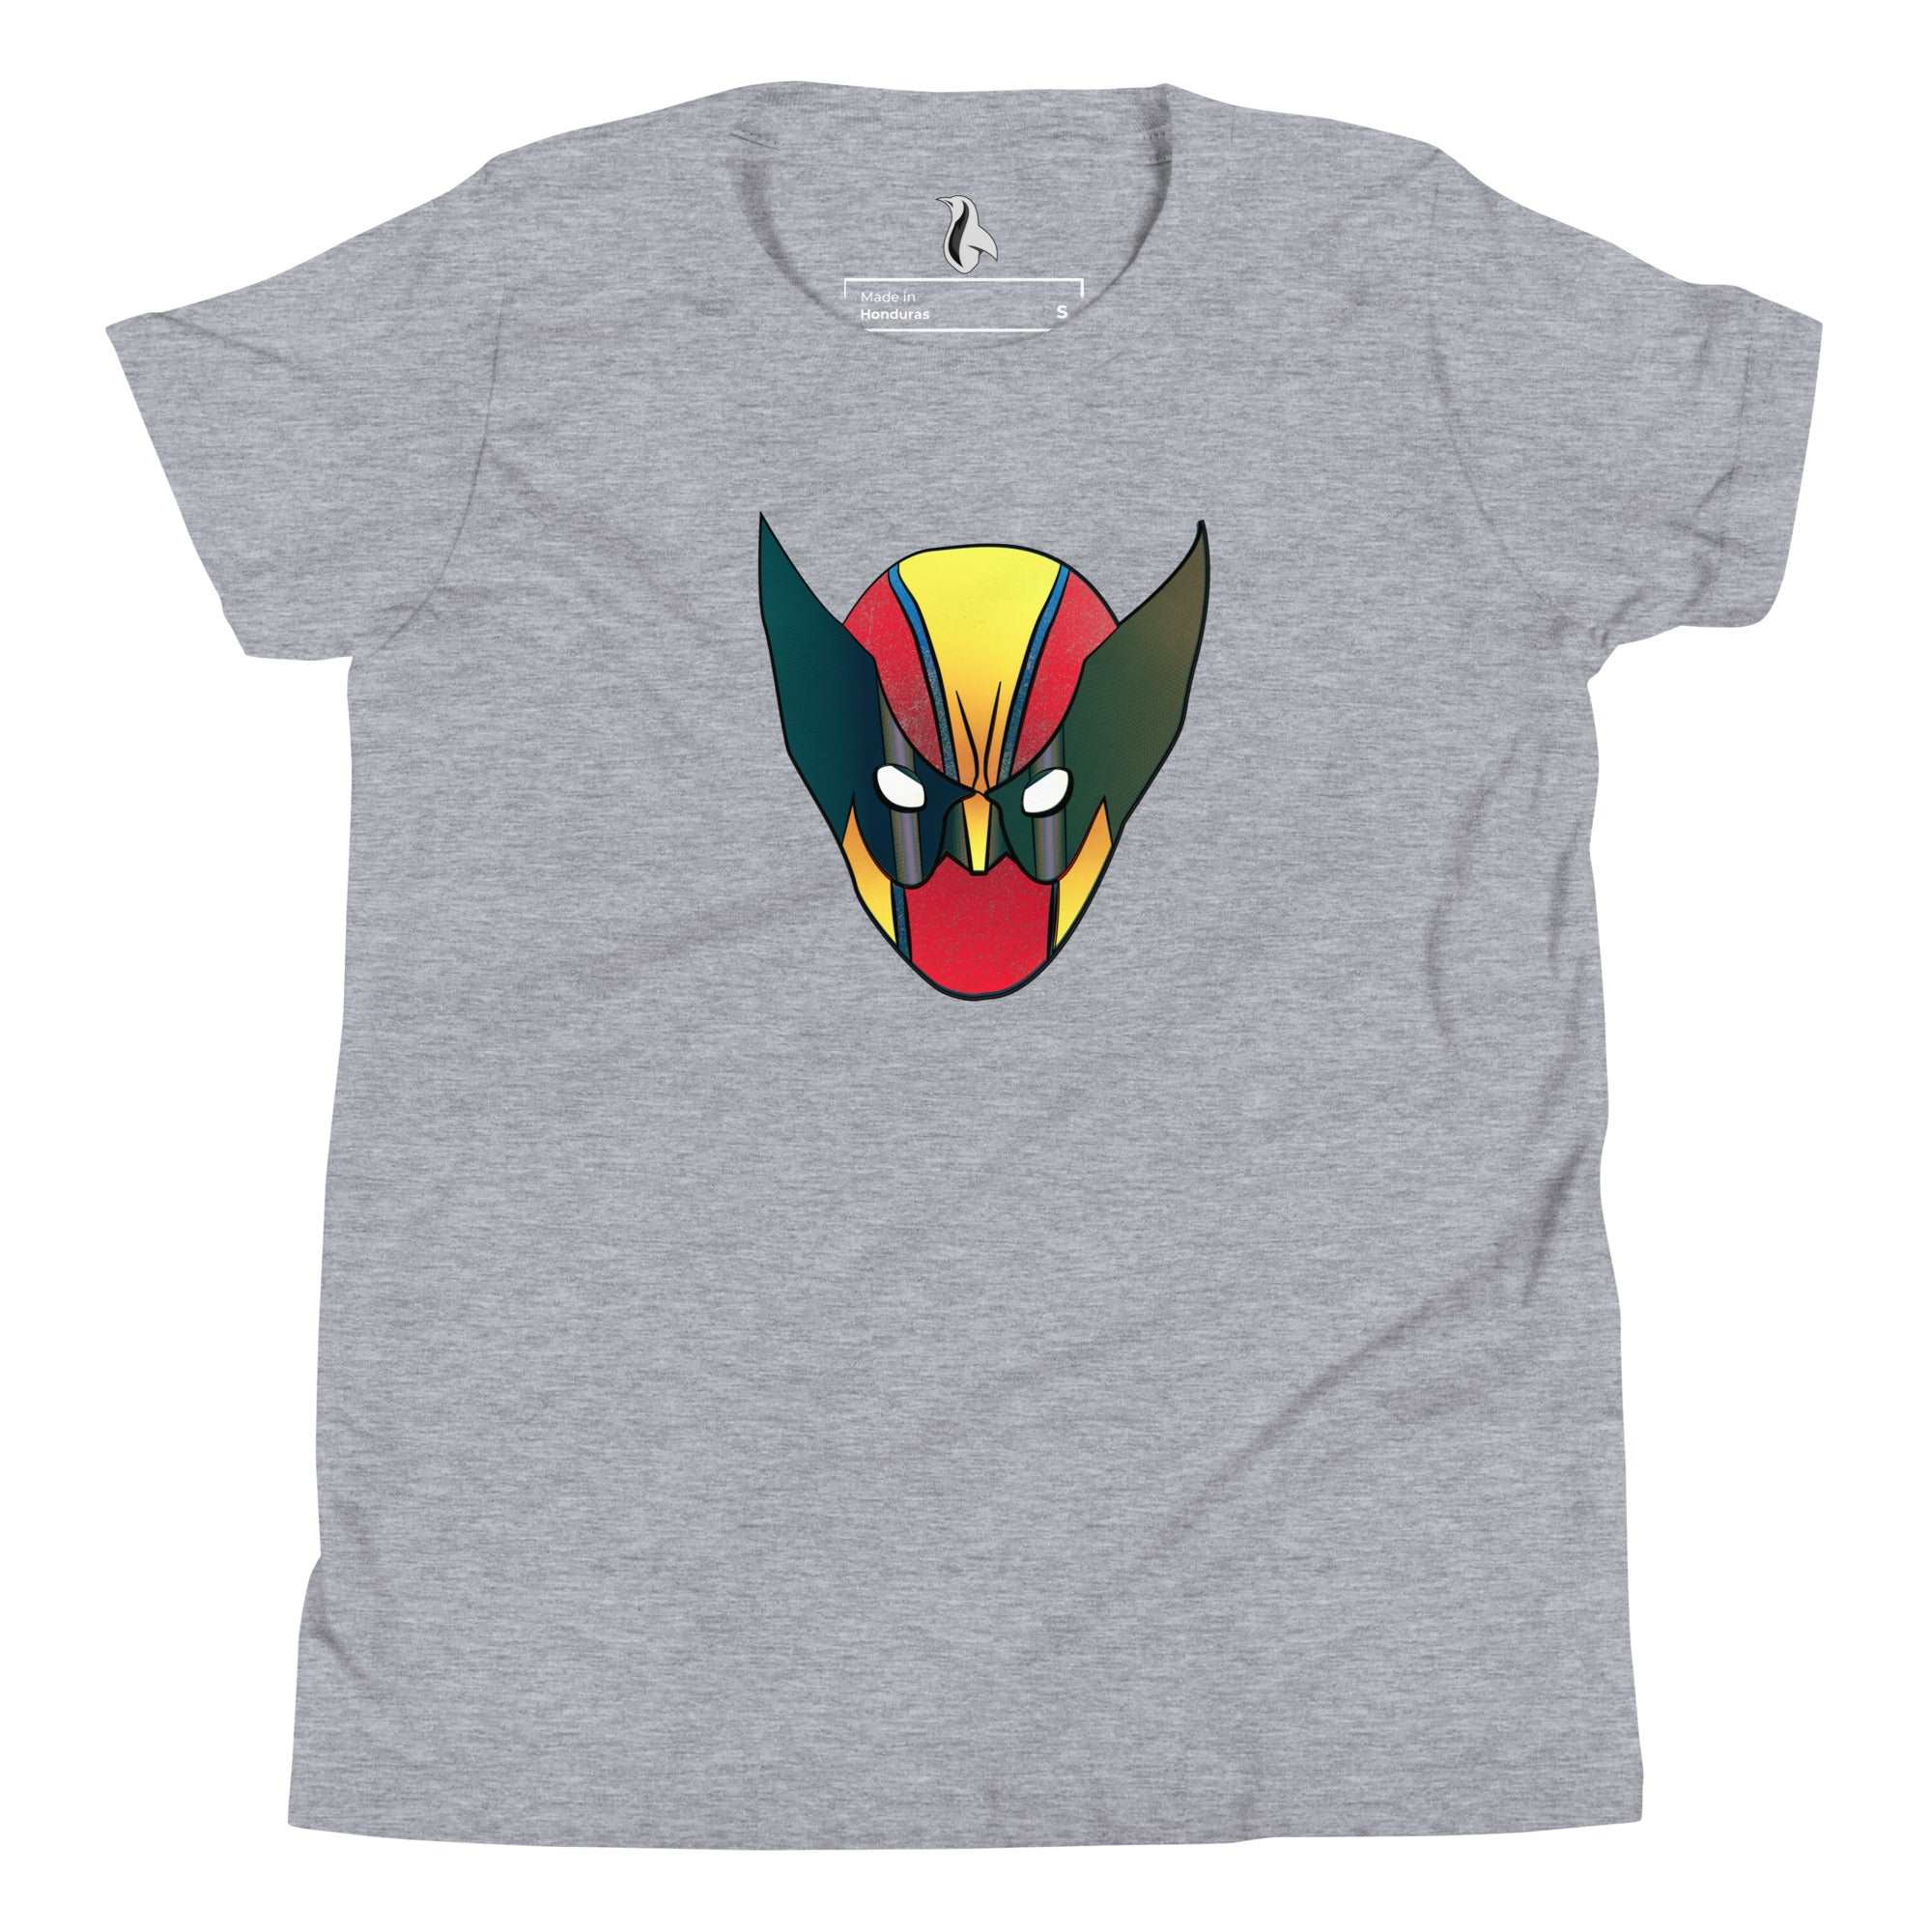 Wolverpool Youth Short Sleeve T-Shirt